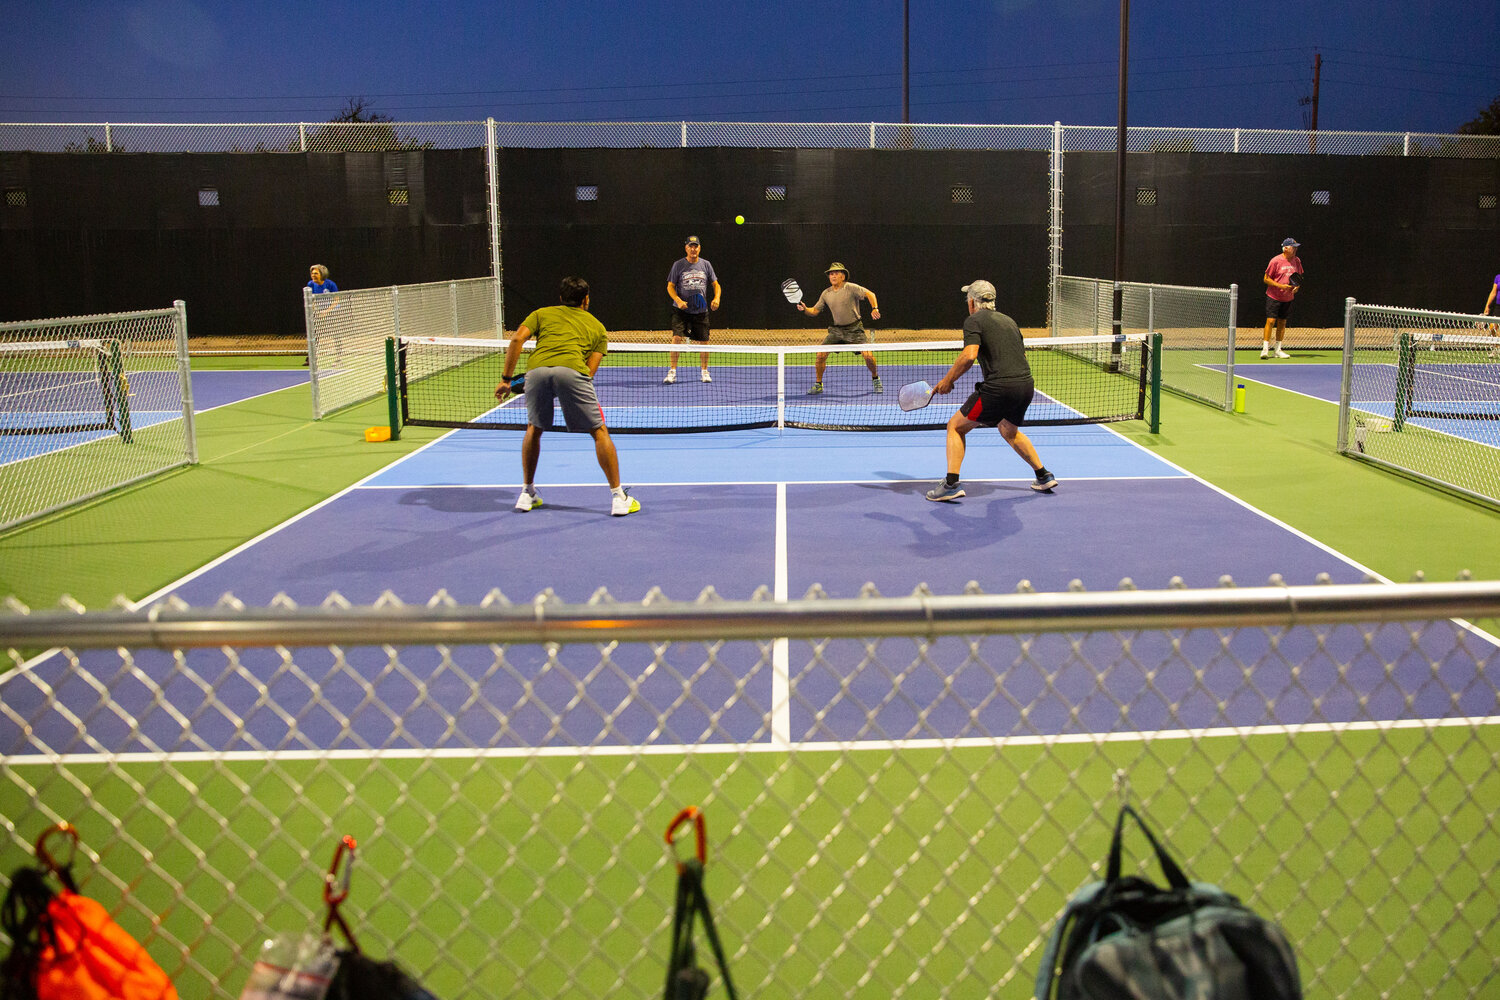 The city of Mesa has 30 pickleball courts within its parks and recreation facilities network.